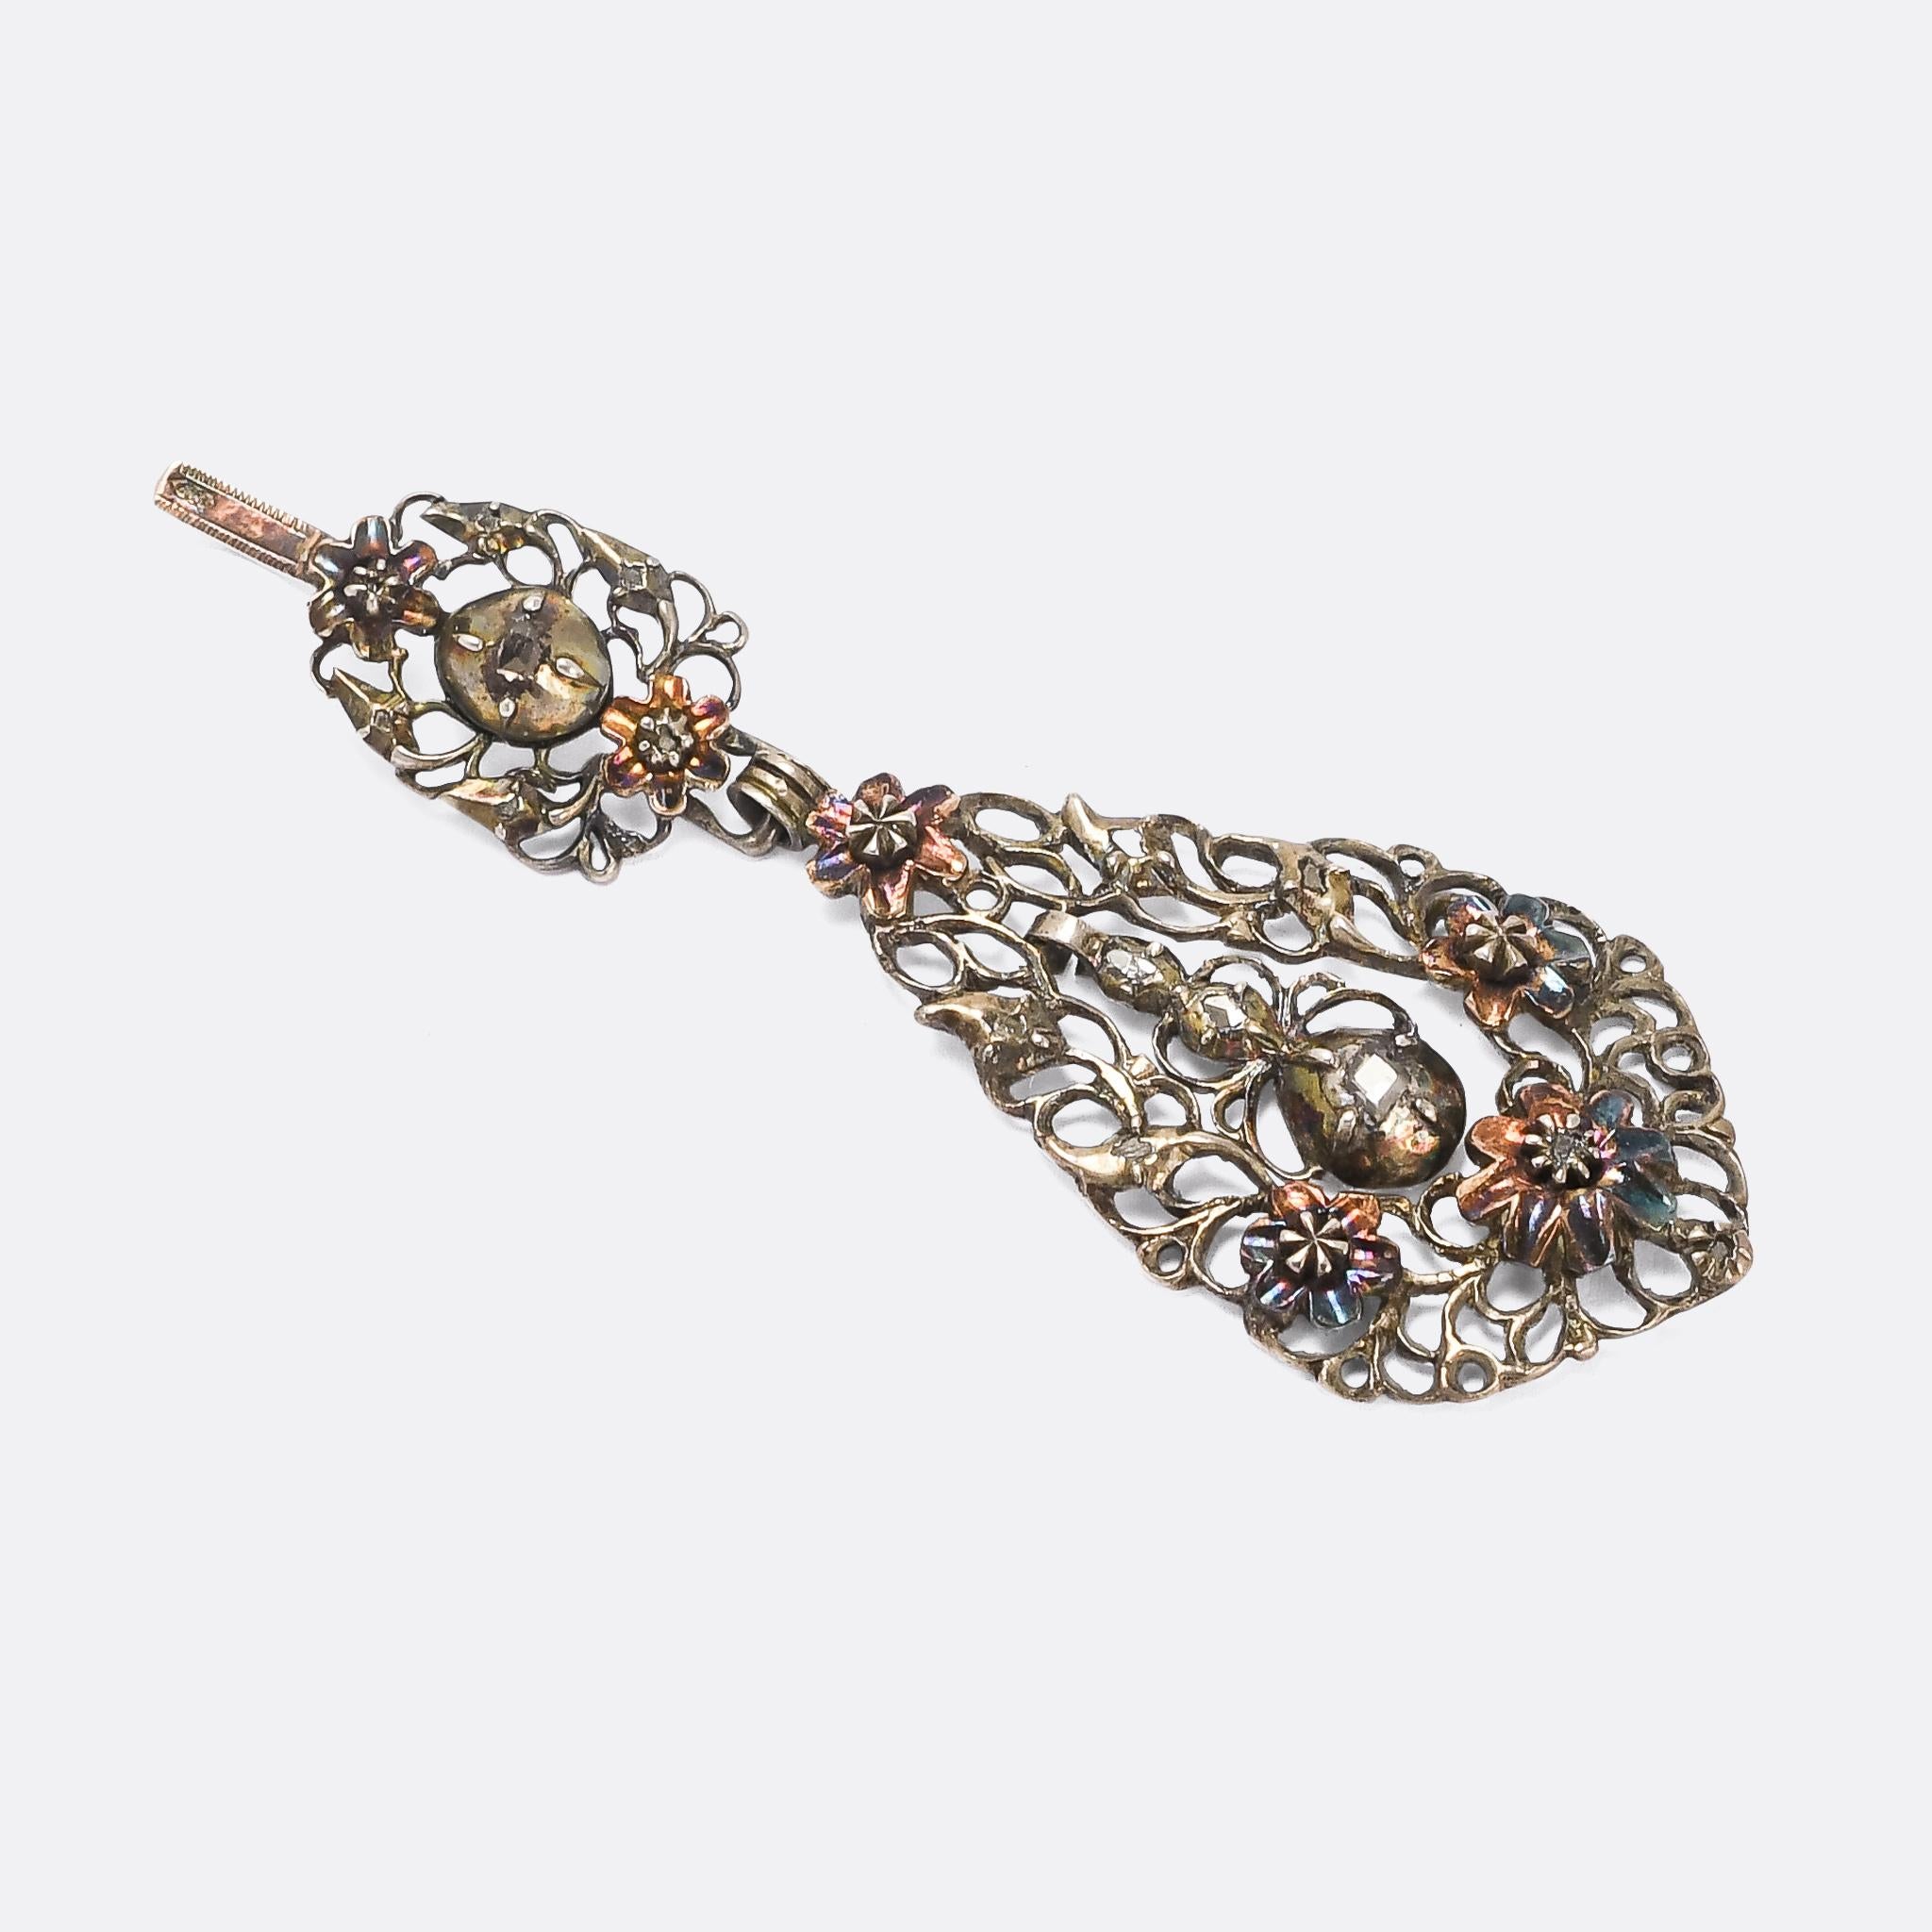 An ornate 18th Century diamond pendant from the Iberian peninsula. The style is striking, and instantly recognisable: characterised by the larger scale of pieces, florid floral openwork, domed rub-over settings, and the use of rose cut diamonds.